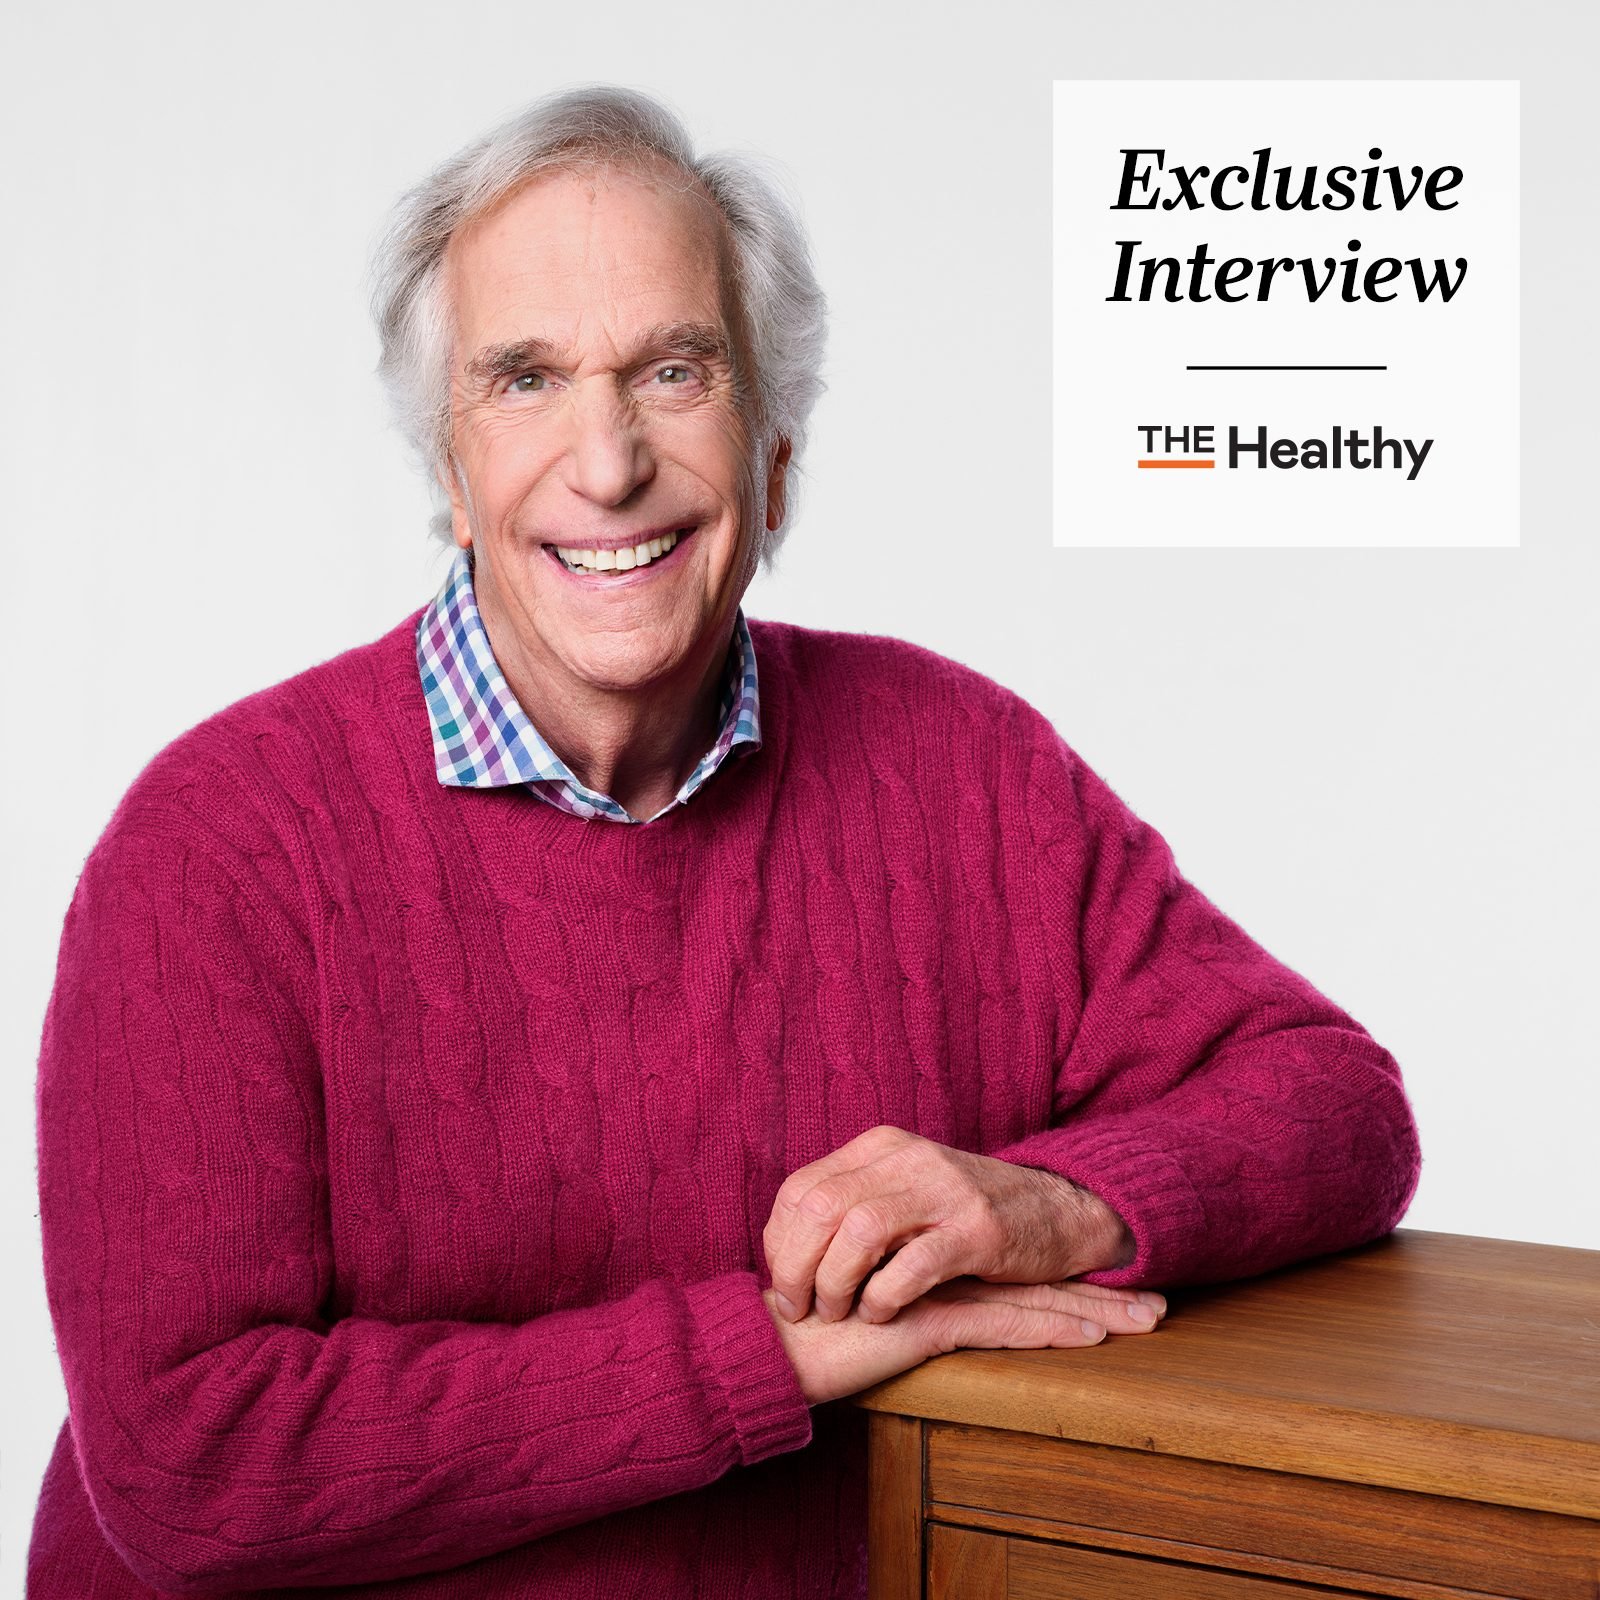 Henry Winkler Reveals the Family Health Problem That Opened His Eyes